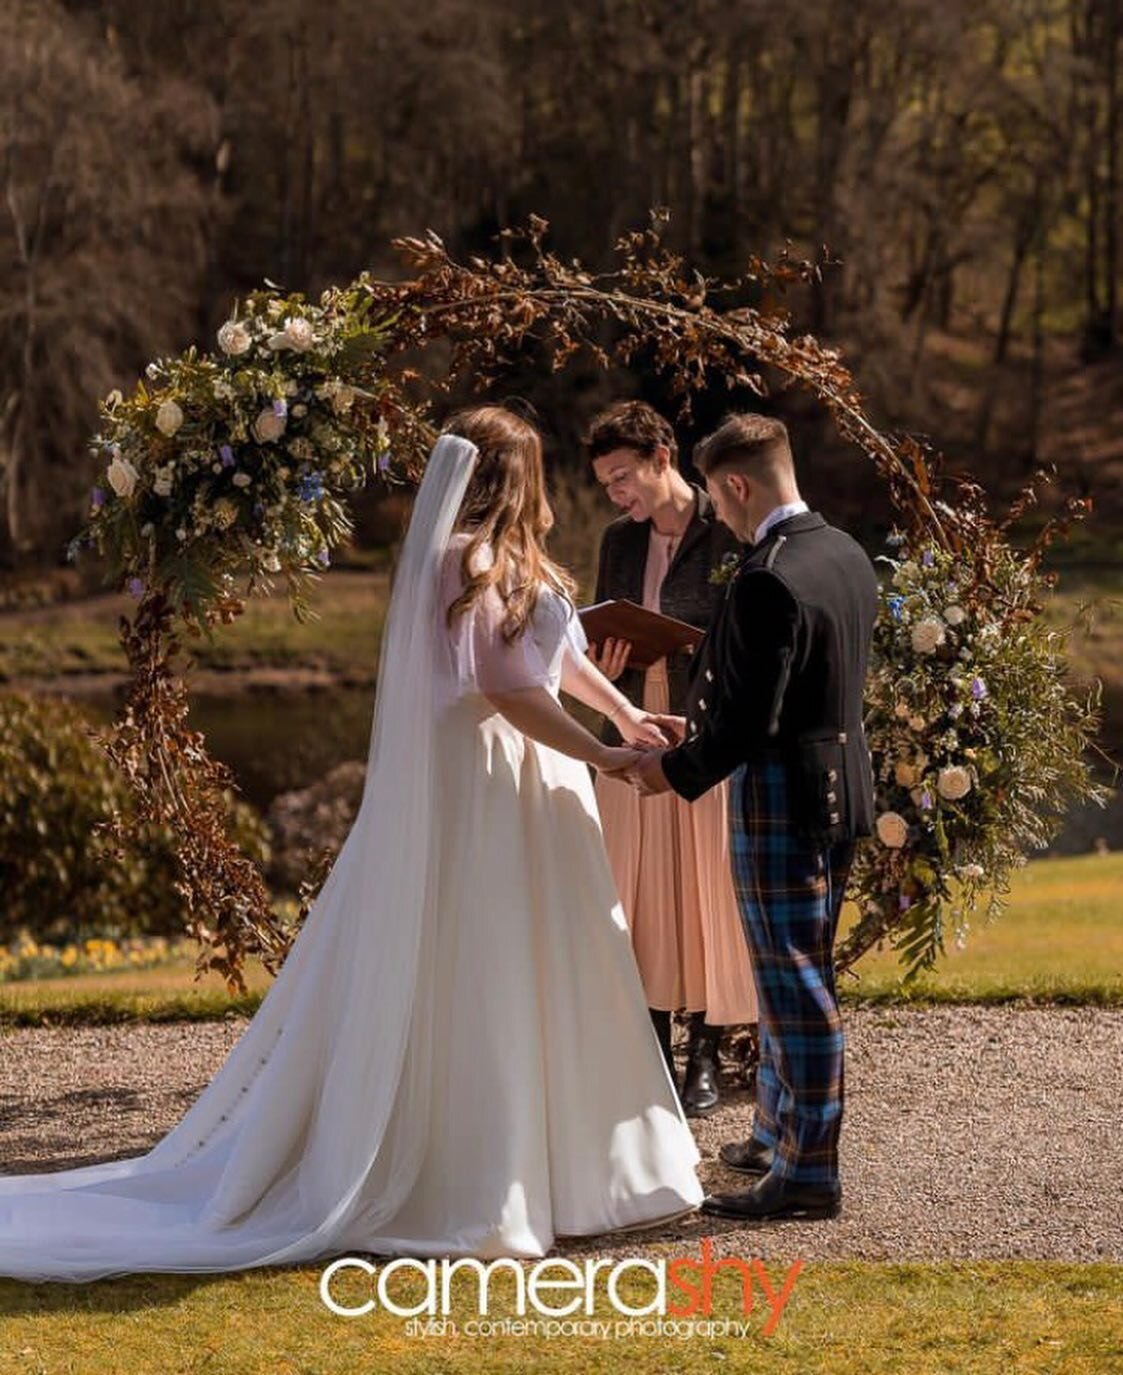 ❤️Our beautiful bride Amy ❤️

Amy chose a beautiful gown from @justinalexander and how amazing does she look?! 

Congratulations to you both! And thank you for choosing Carringtons Bridal Boutique 🥰

Jan x

@camerashyphotographyedinburgh 📸

#realbr